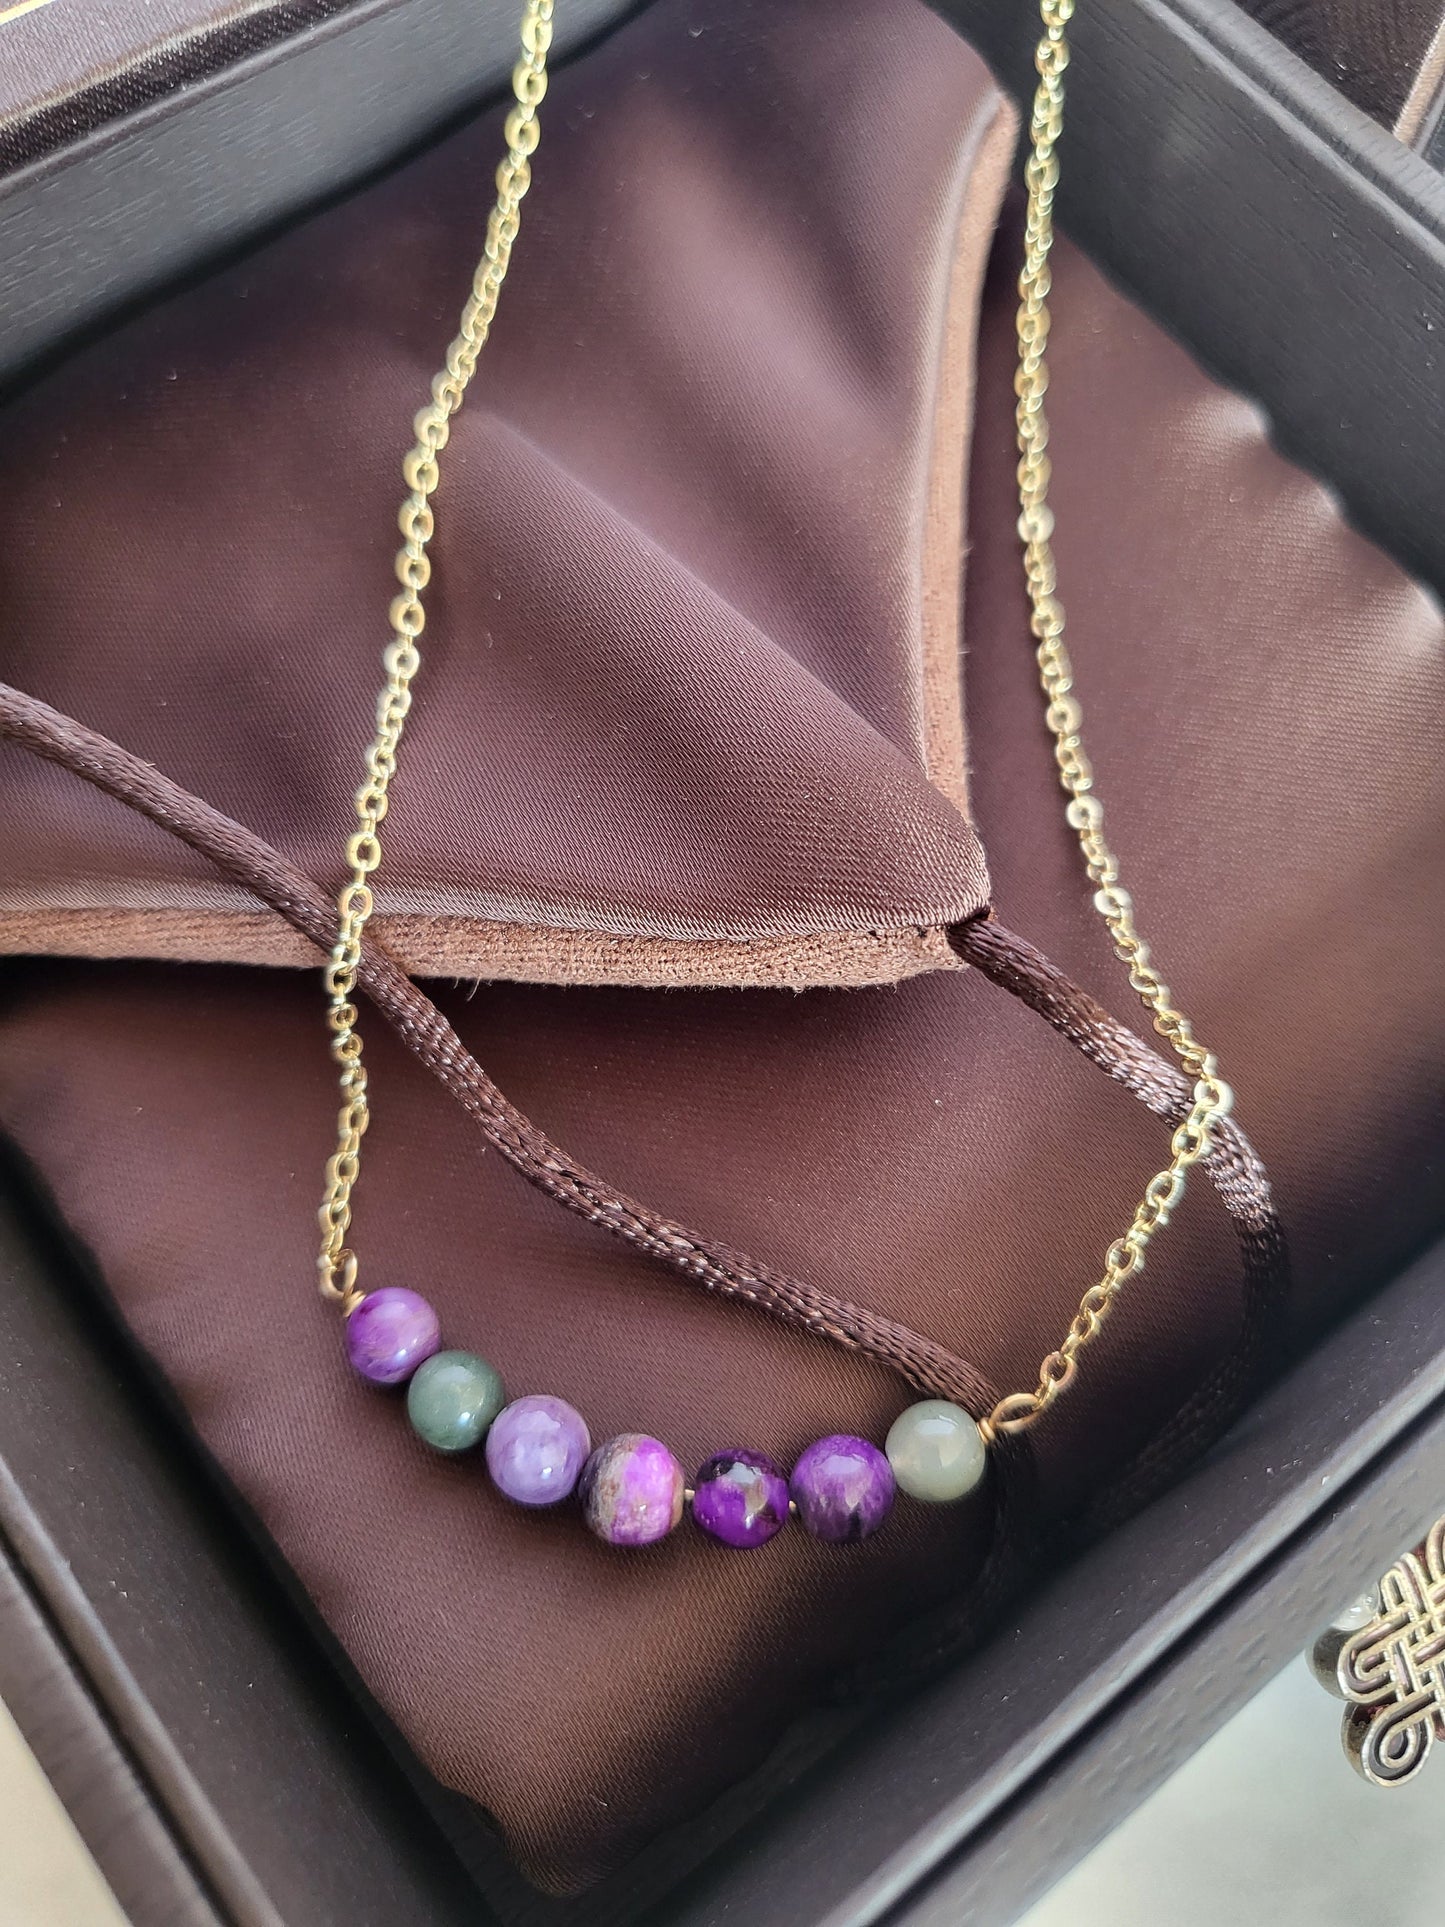 14k Gold Natural Sugilite Multi-color Bead Blue, Purple, Green Stone bead Crystal Dainty Chain Necklace